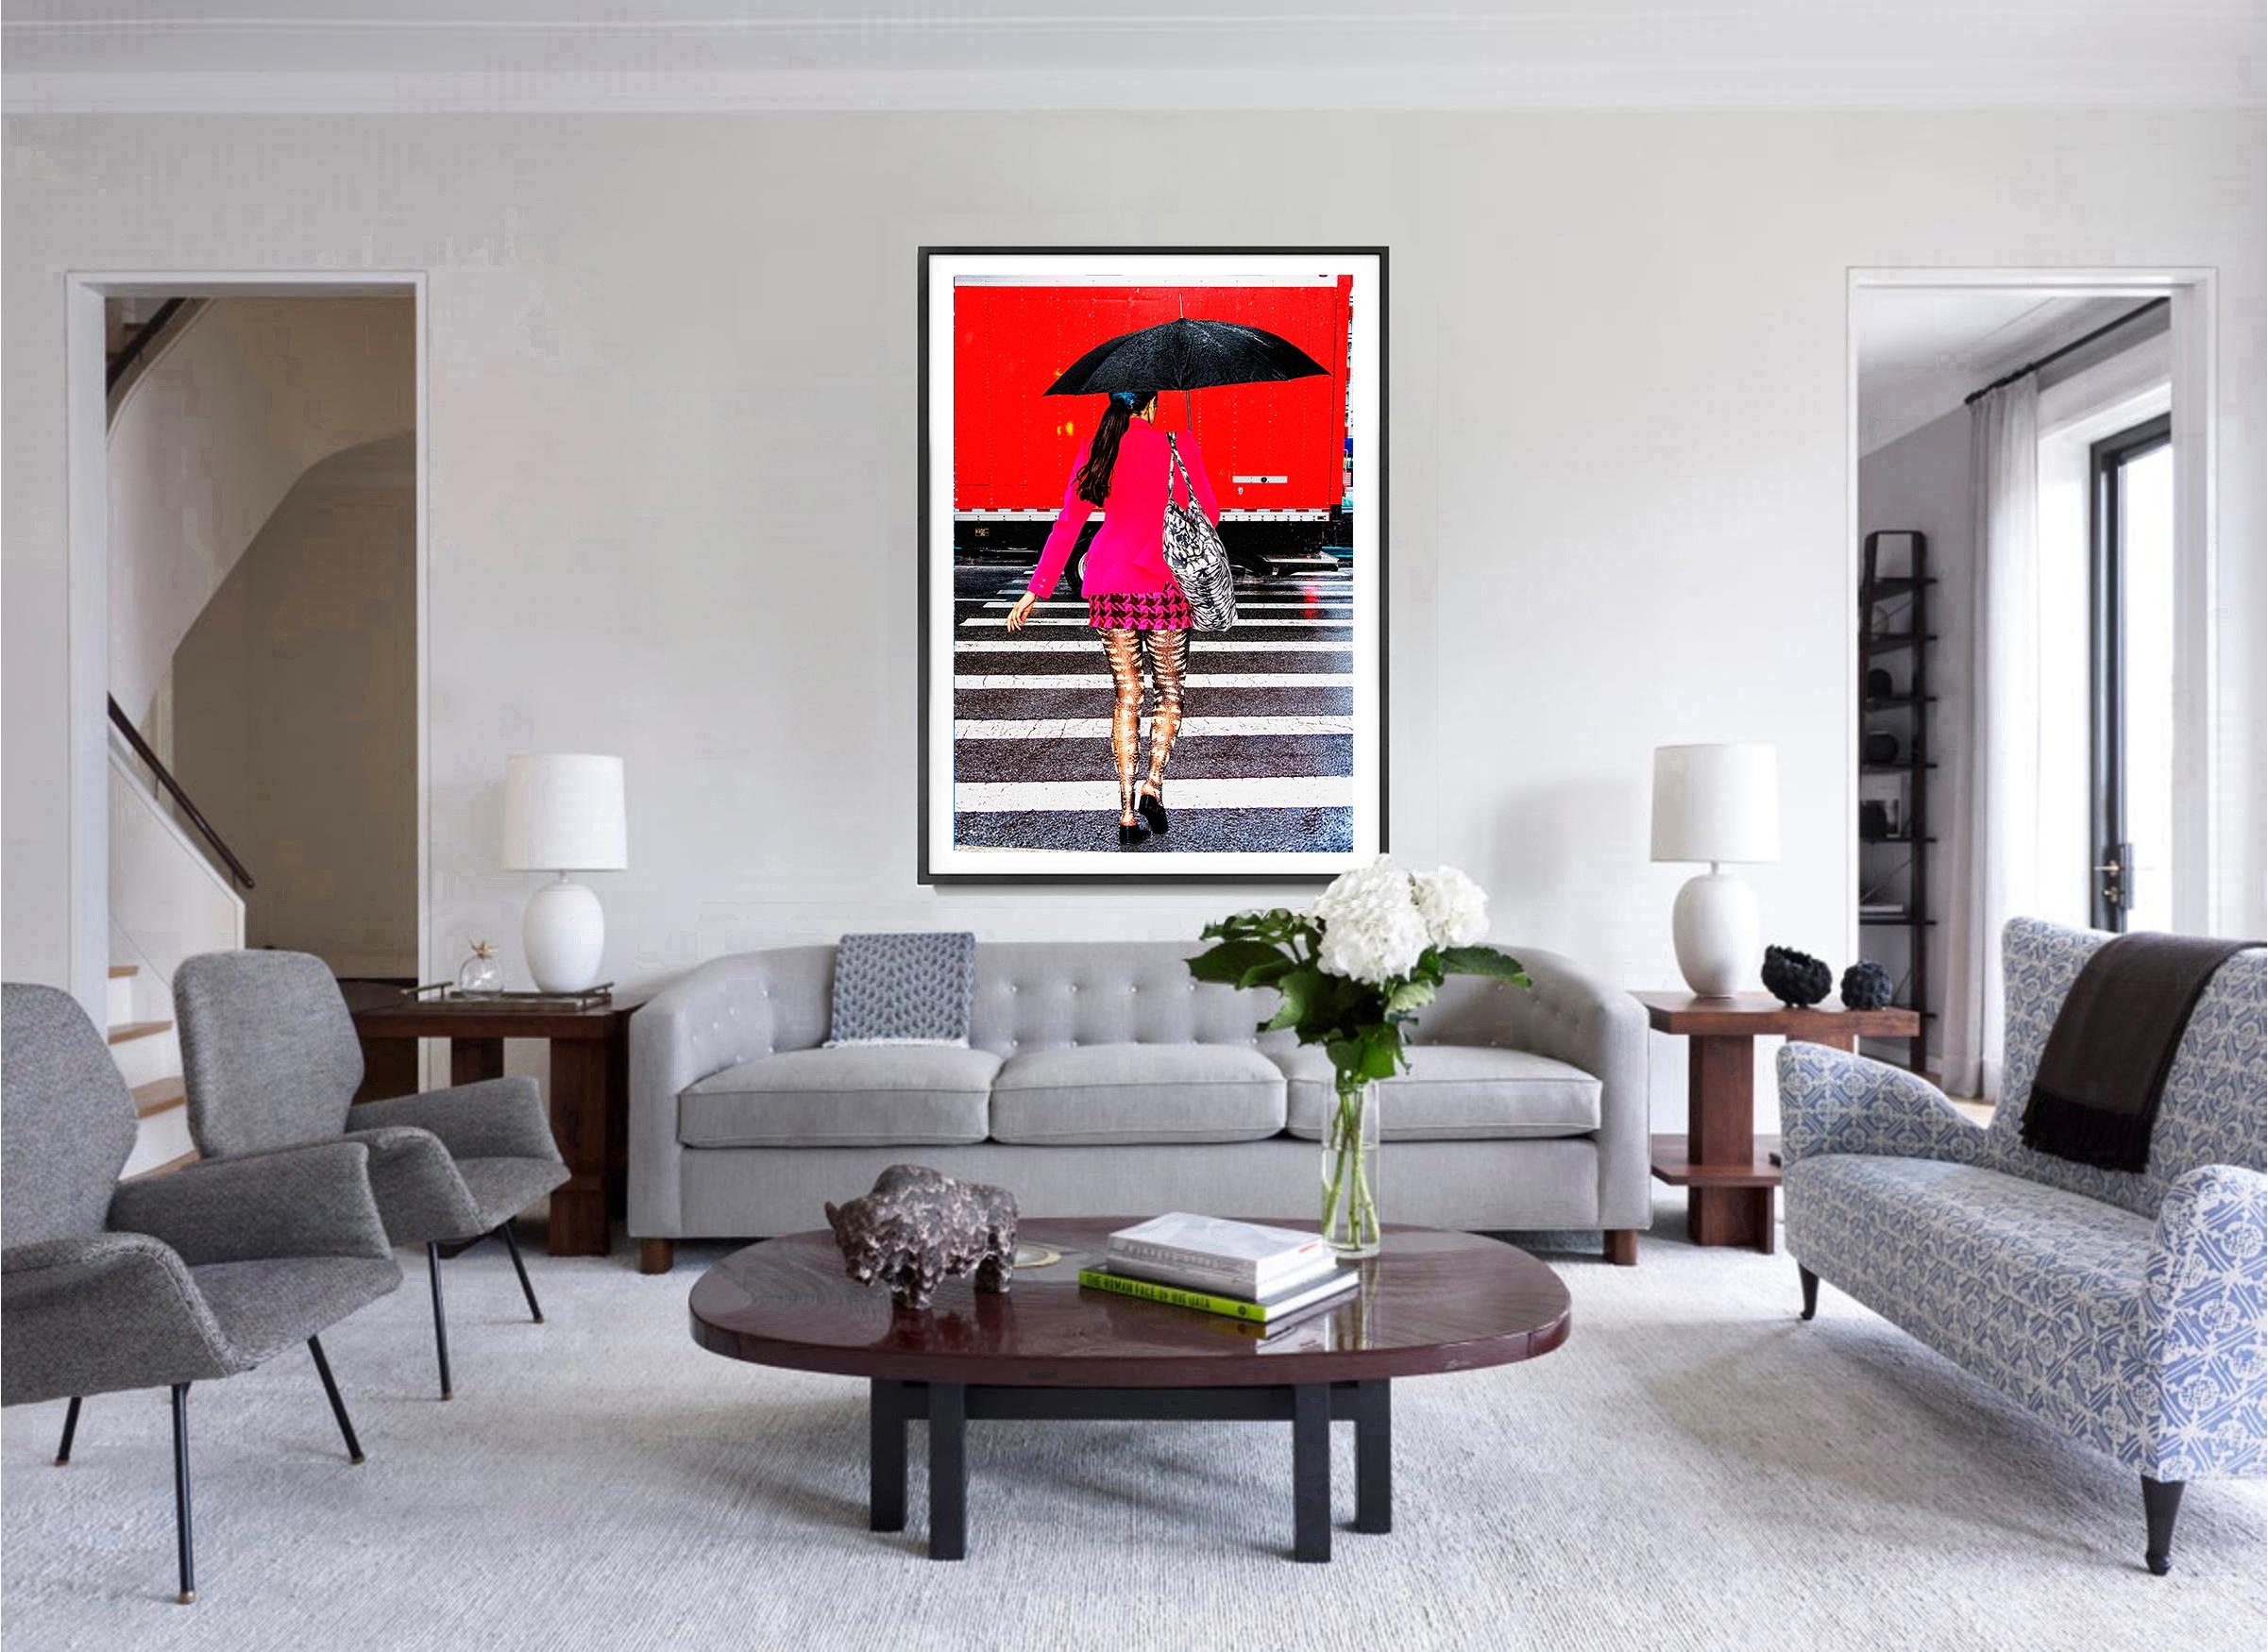 Street Fashionista in Pink Ensemble on New York City Rainy Day  - Abstract Geometric Photograph by Mitchell Funk